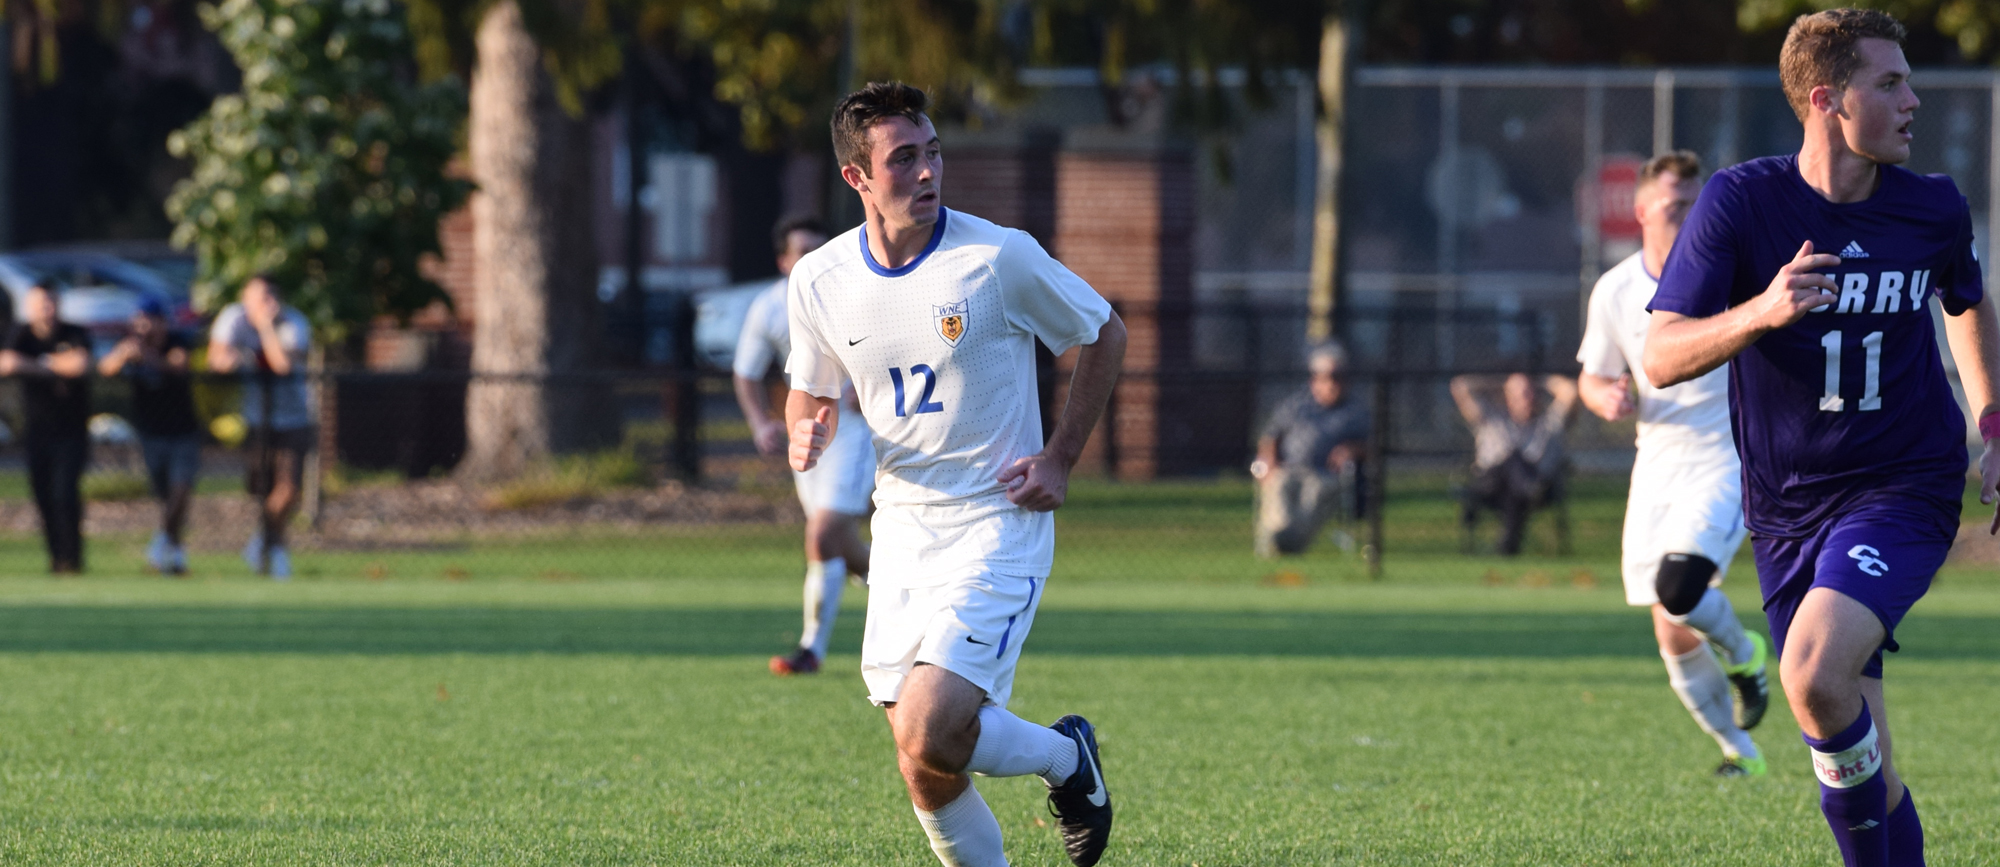 Western New England Uses First Half Barrage to Secure Key CCC Victory over Curry, 3-1